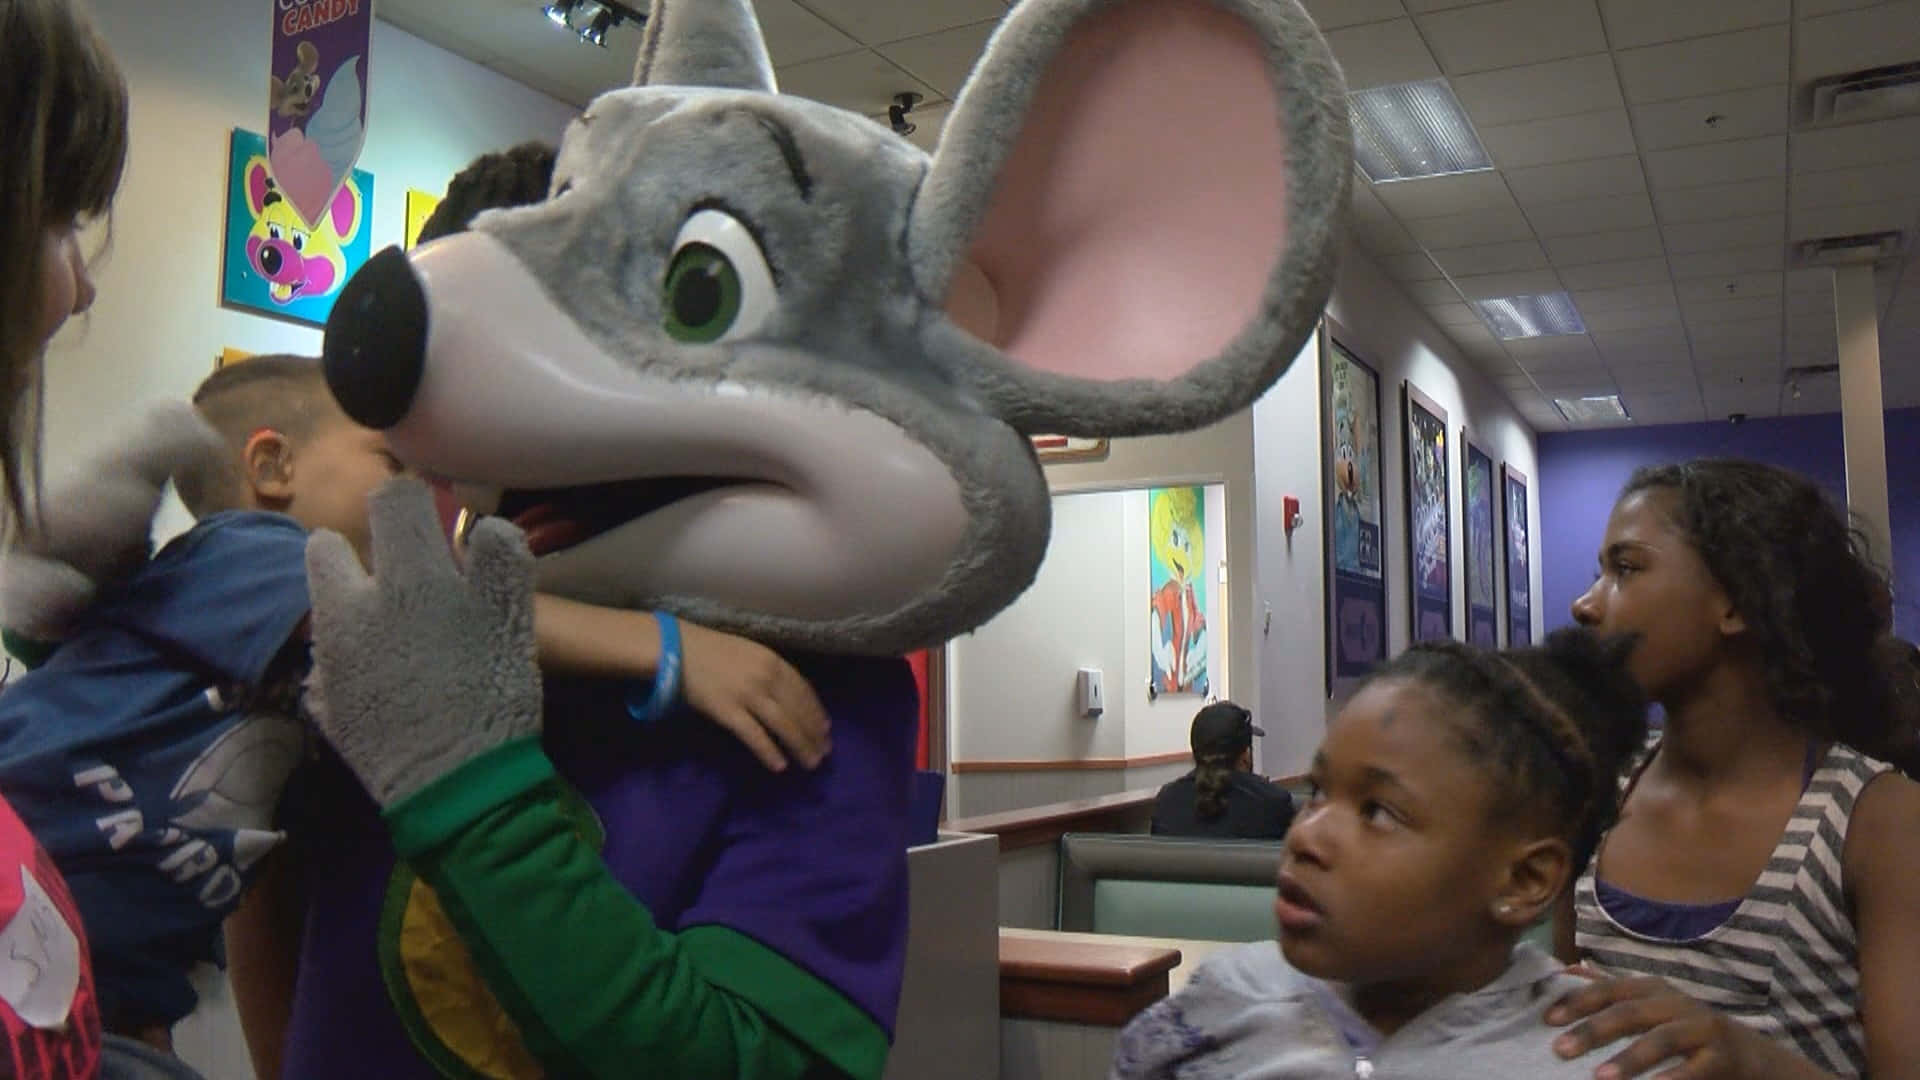 Enjoy Pizza and Games at Chuck E Cheese!